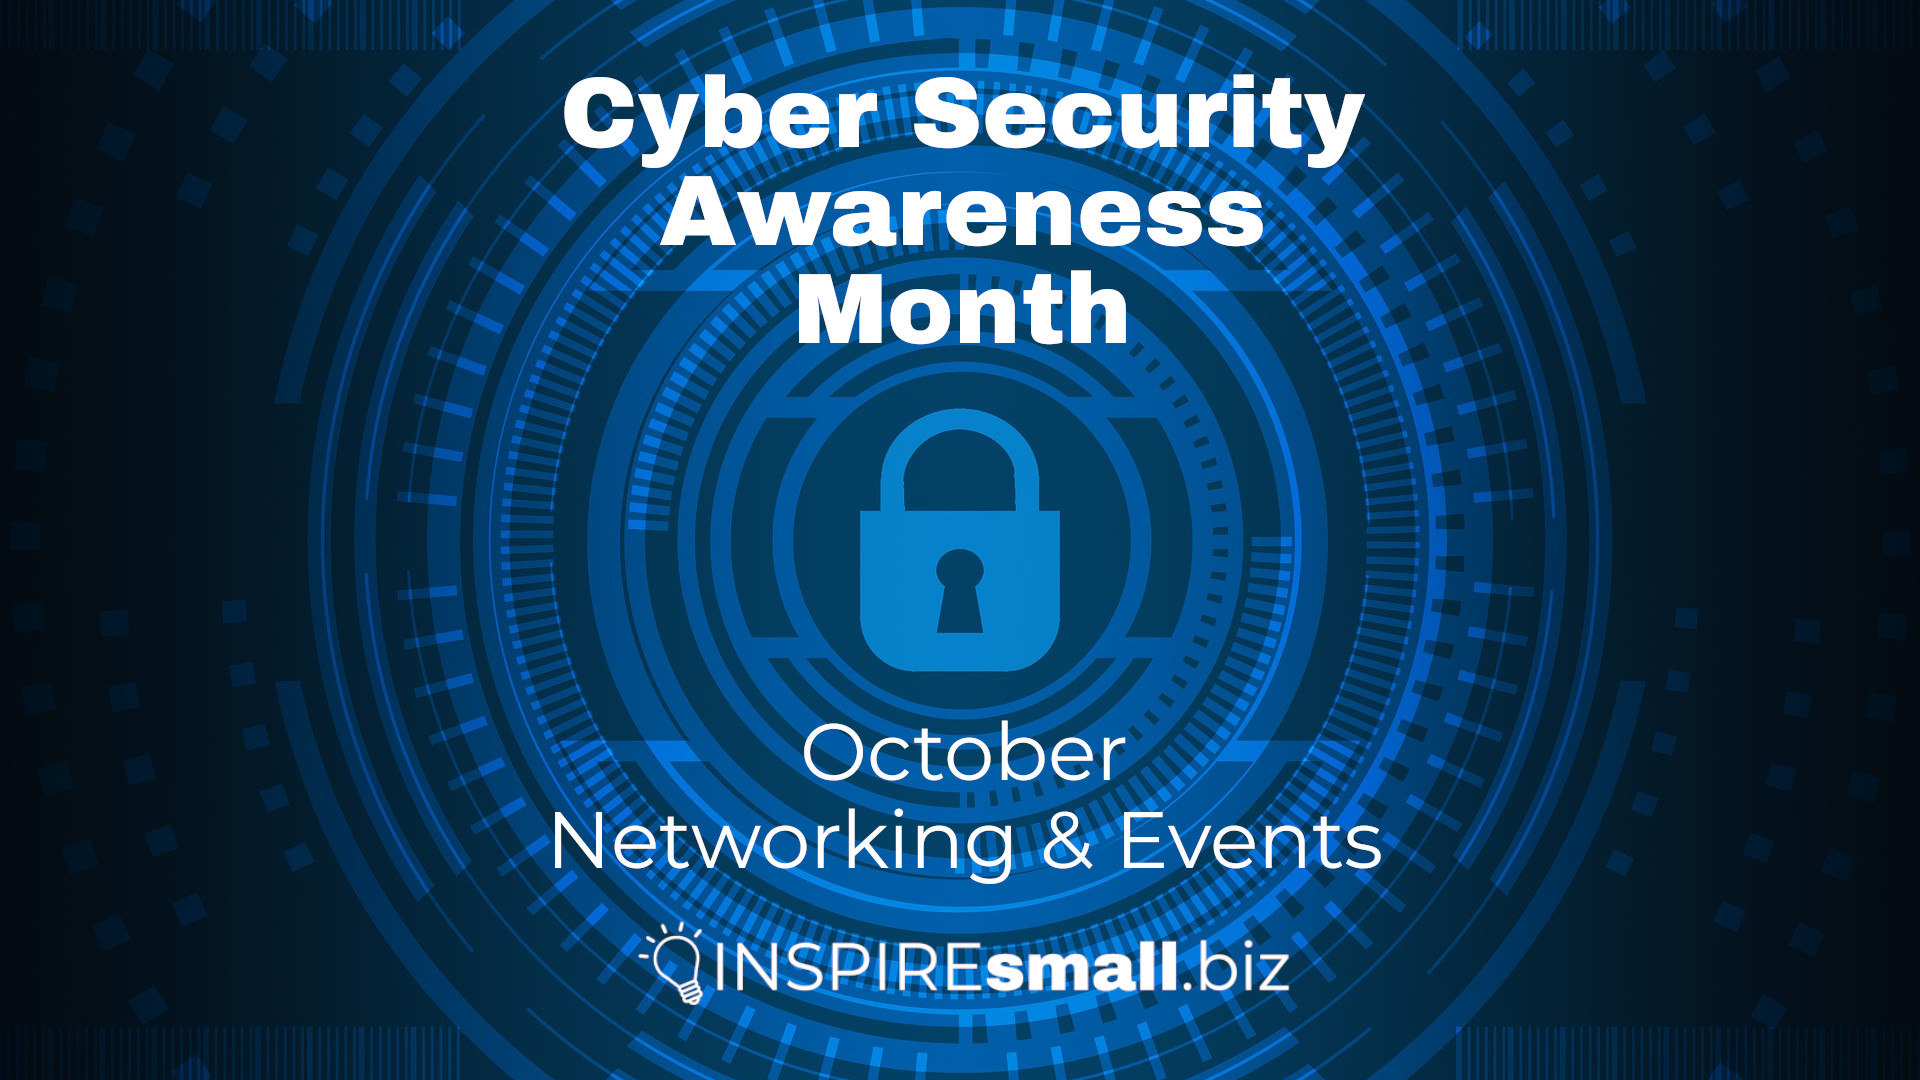 Cyber Security Awareness Month – October 2022 Networking & Events